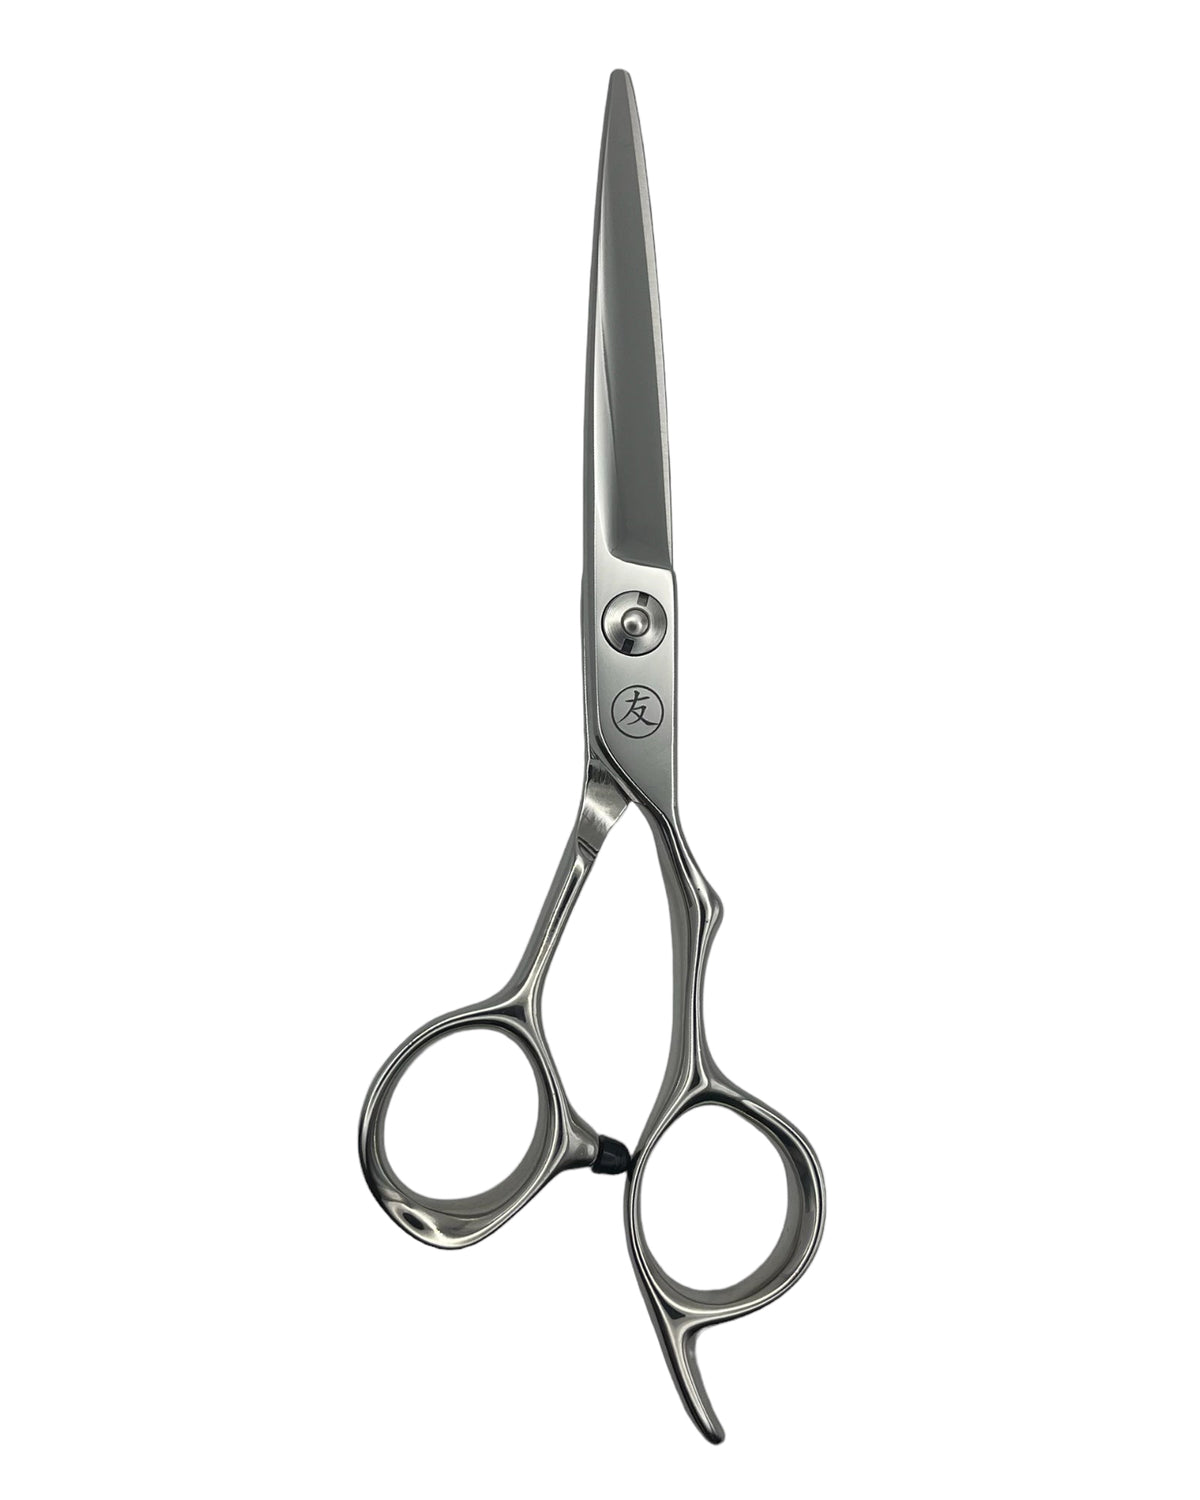 Akito V-1 Hairdressing Scissors and Hair Shears in 6.0 inch